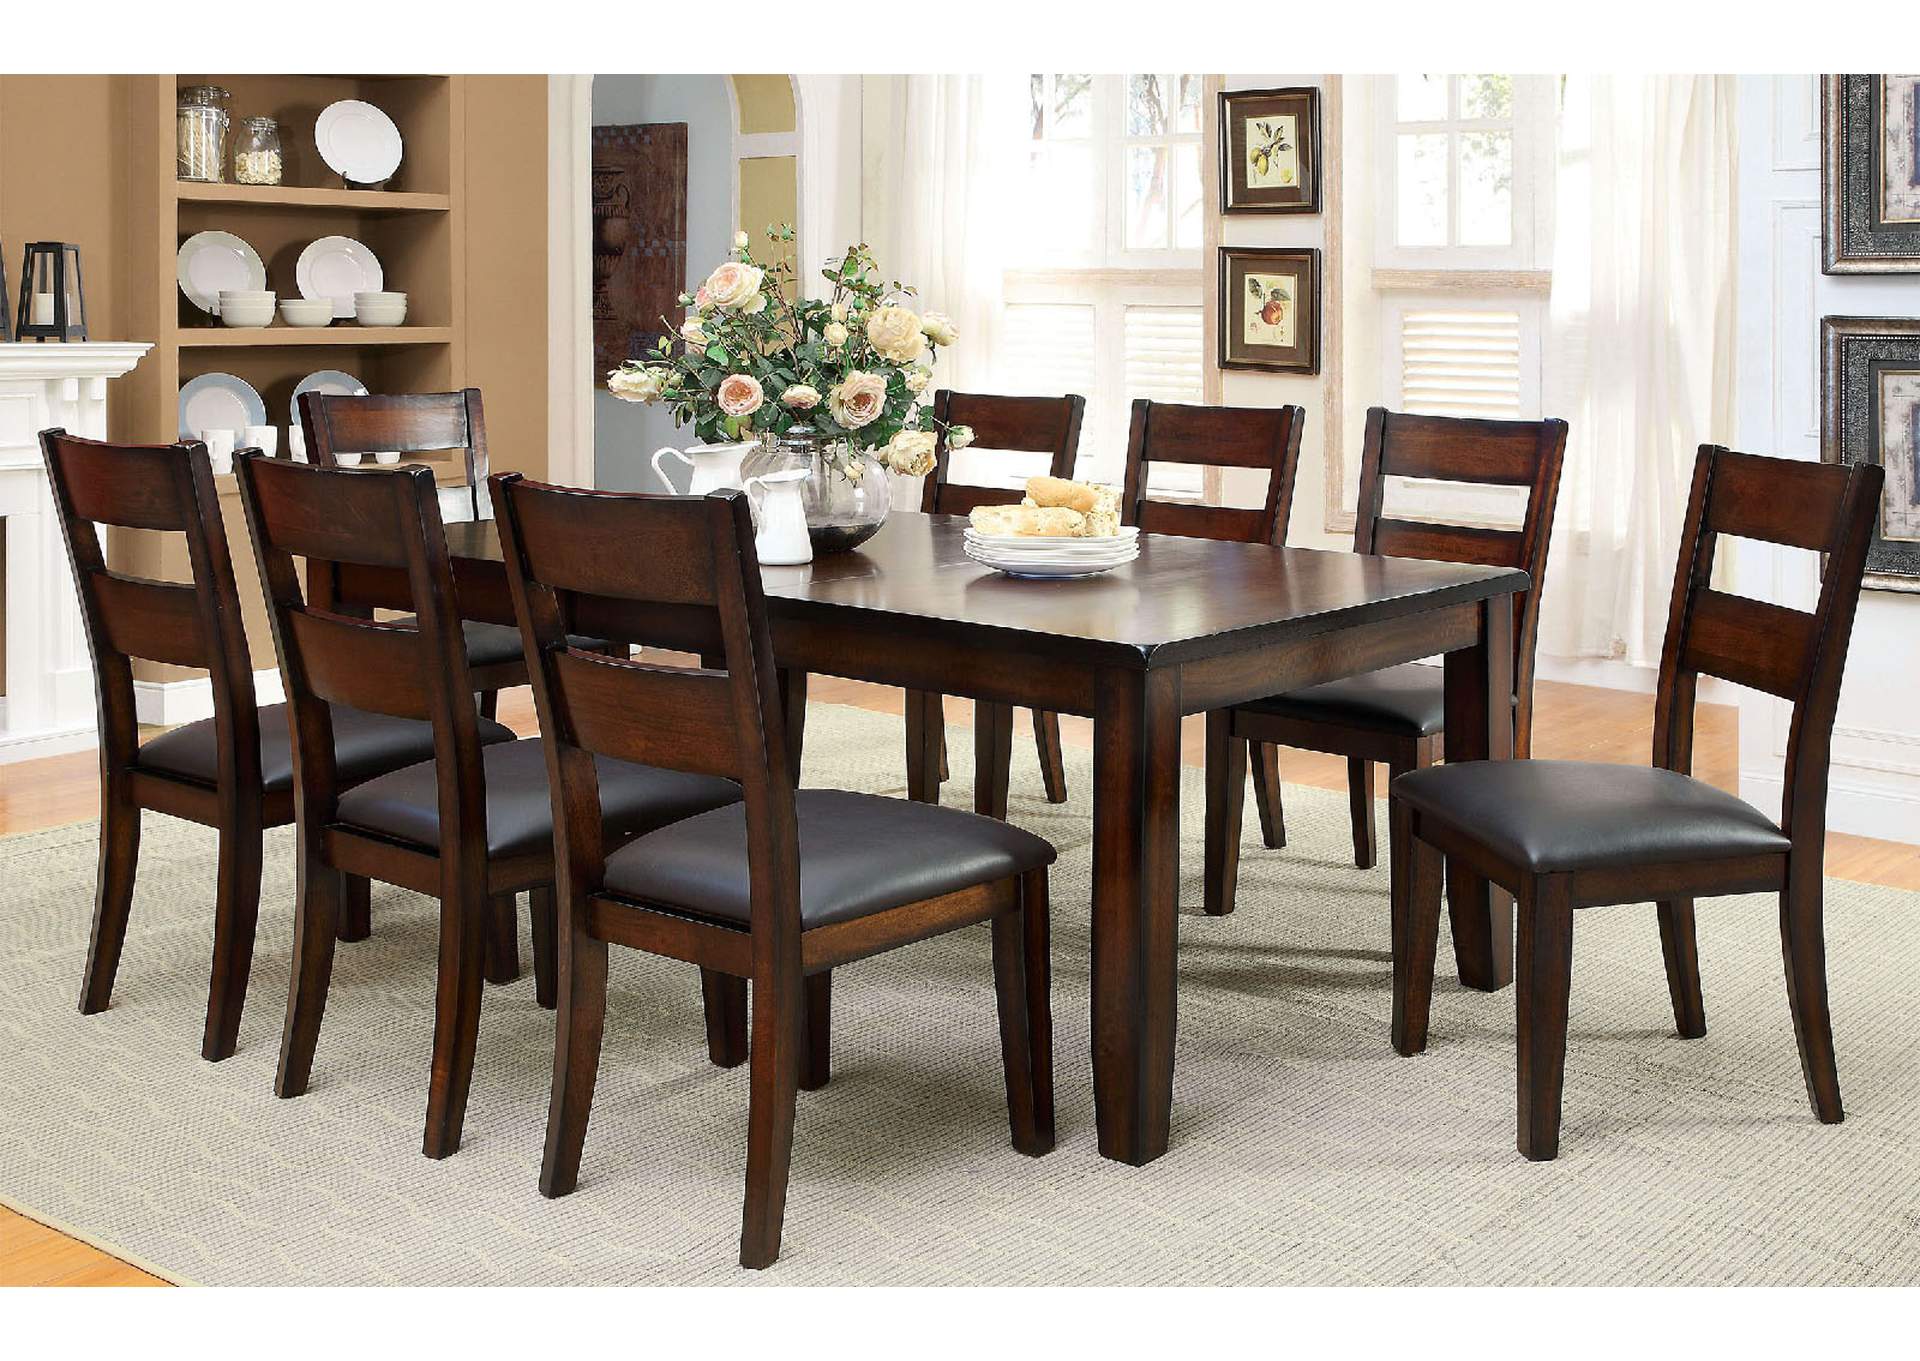 Dickinson l Extension Leaf Dining Table w/6 Side Chair,Furniture of America